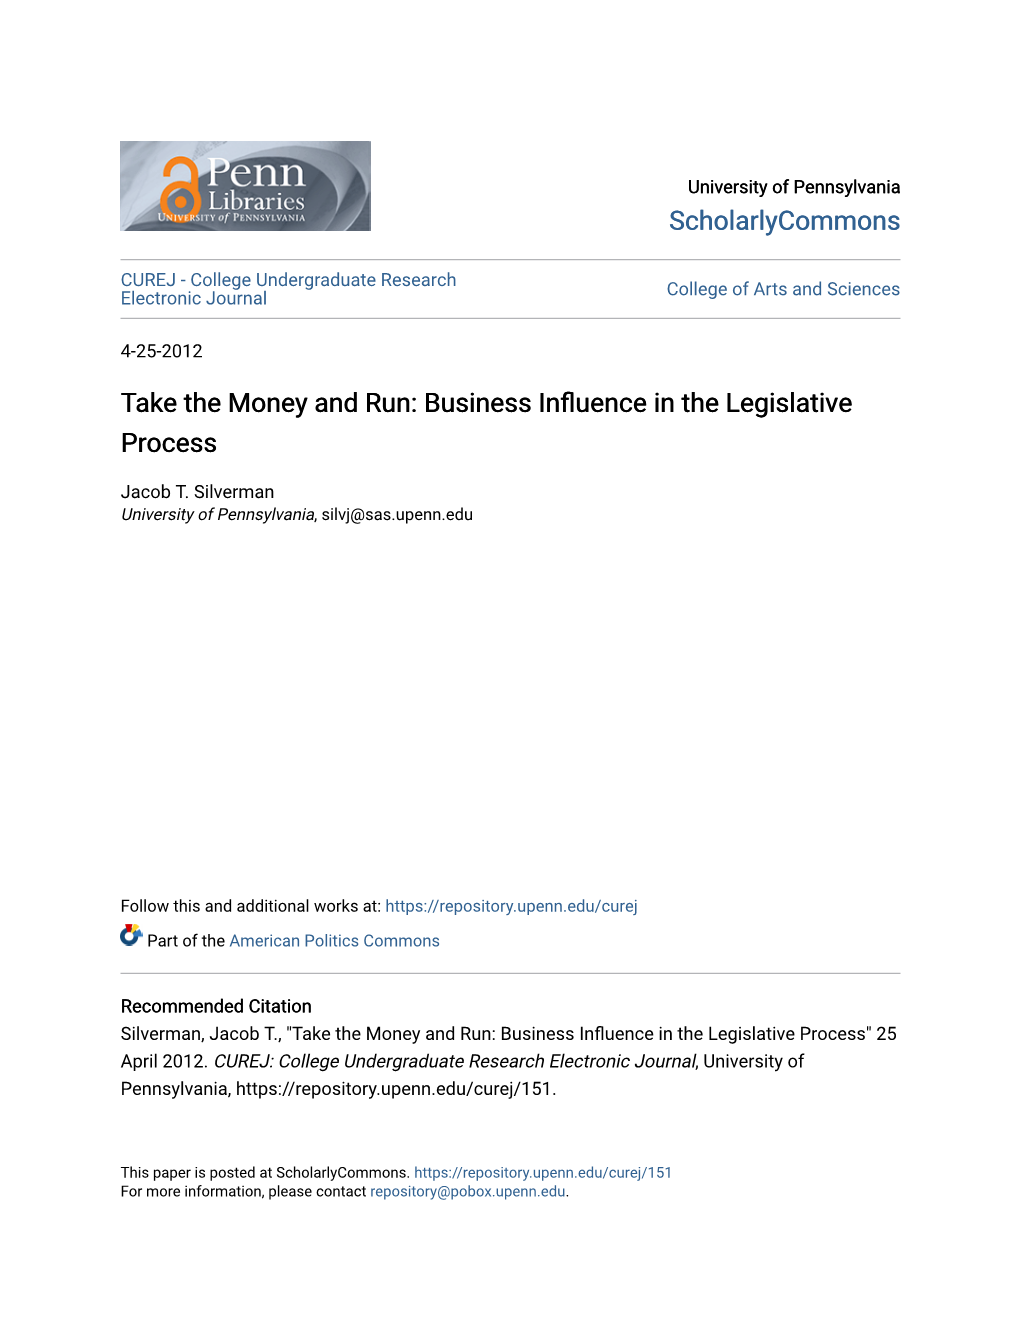 Take the Money and Run: Business Influence in the Legislative Process